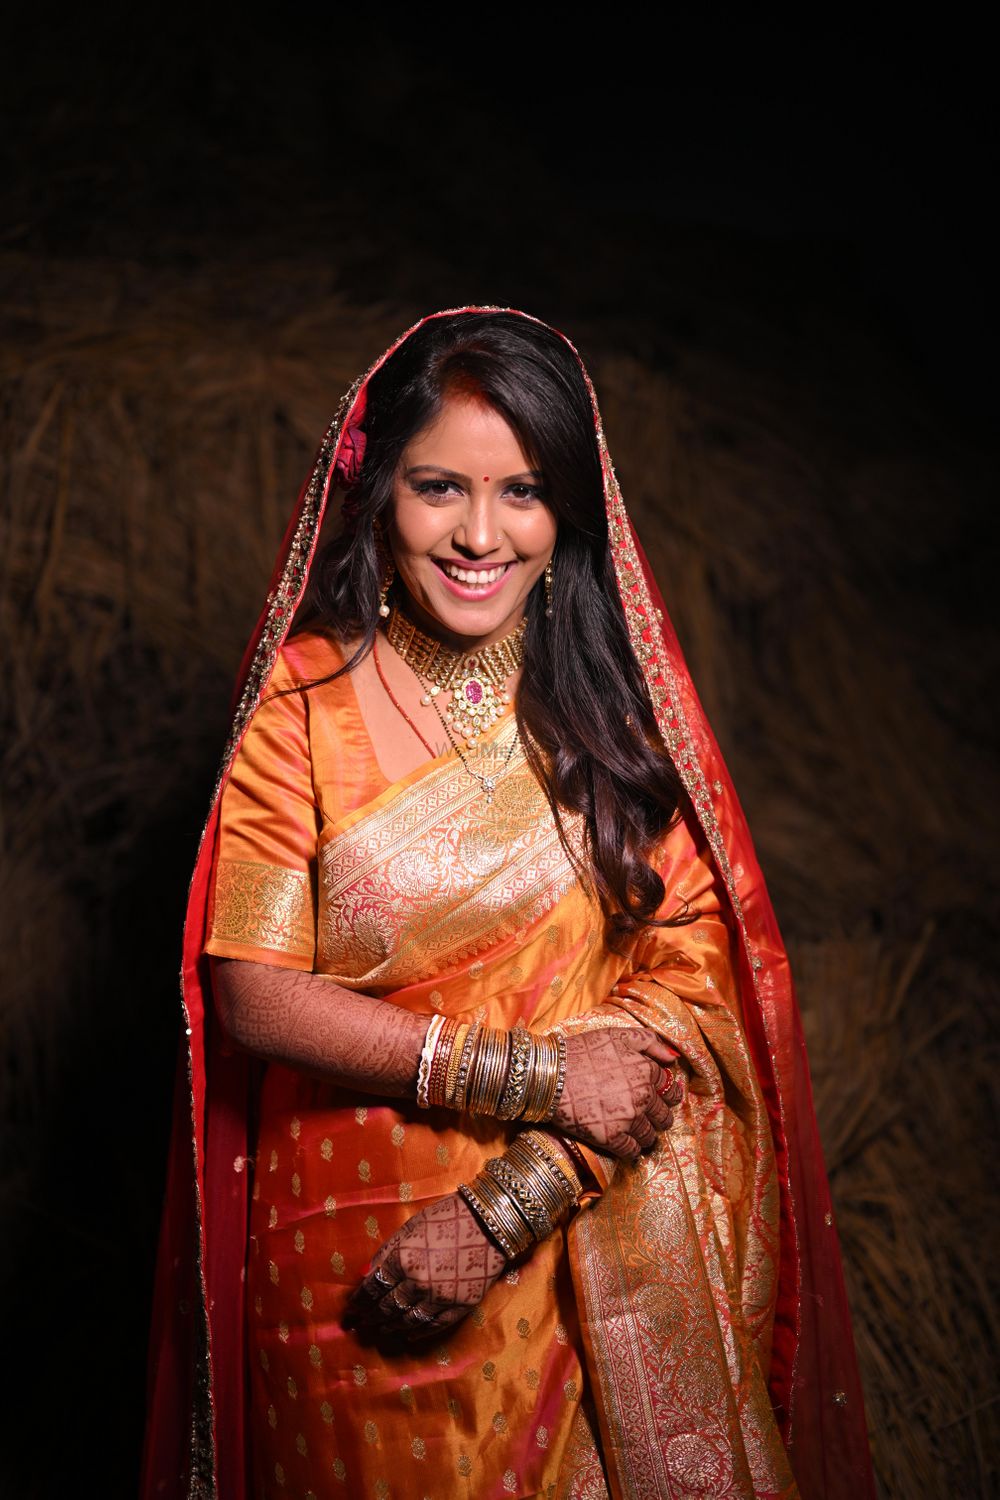 Photo From Reception Makeup - By Makeup By Sweety Agarwal